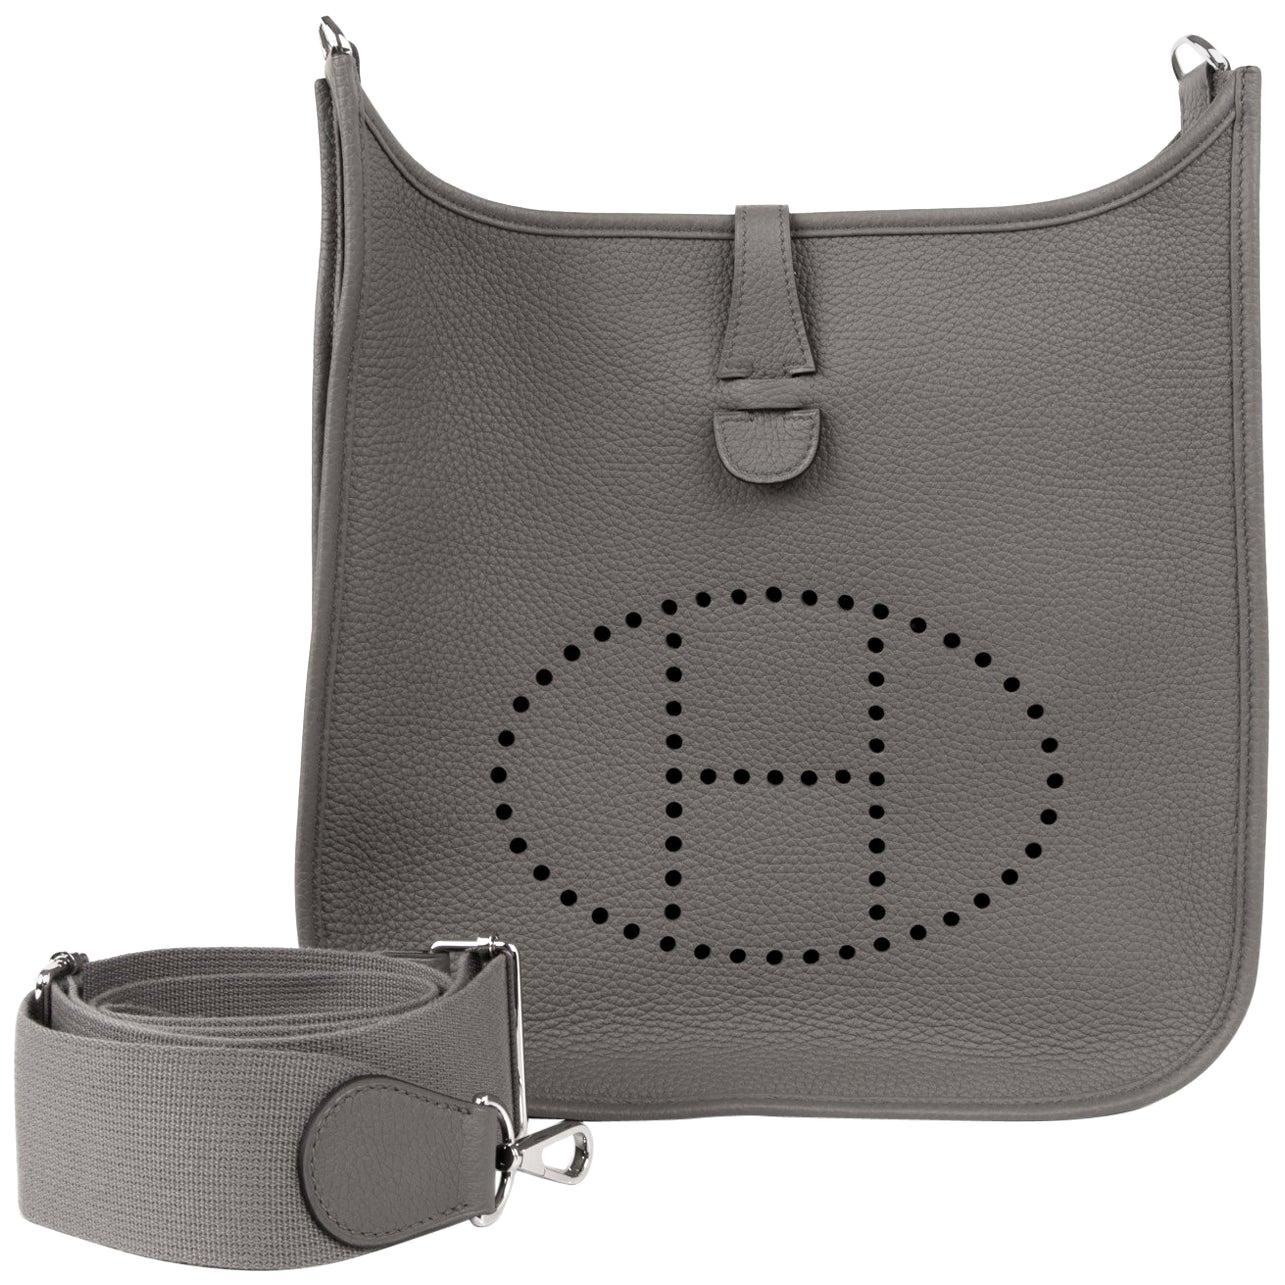 Hermes Evelyne III PM Clemence Bag in Etain with Palladium